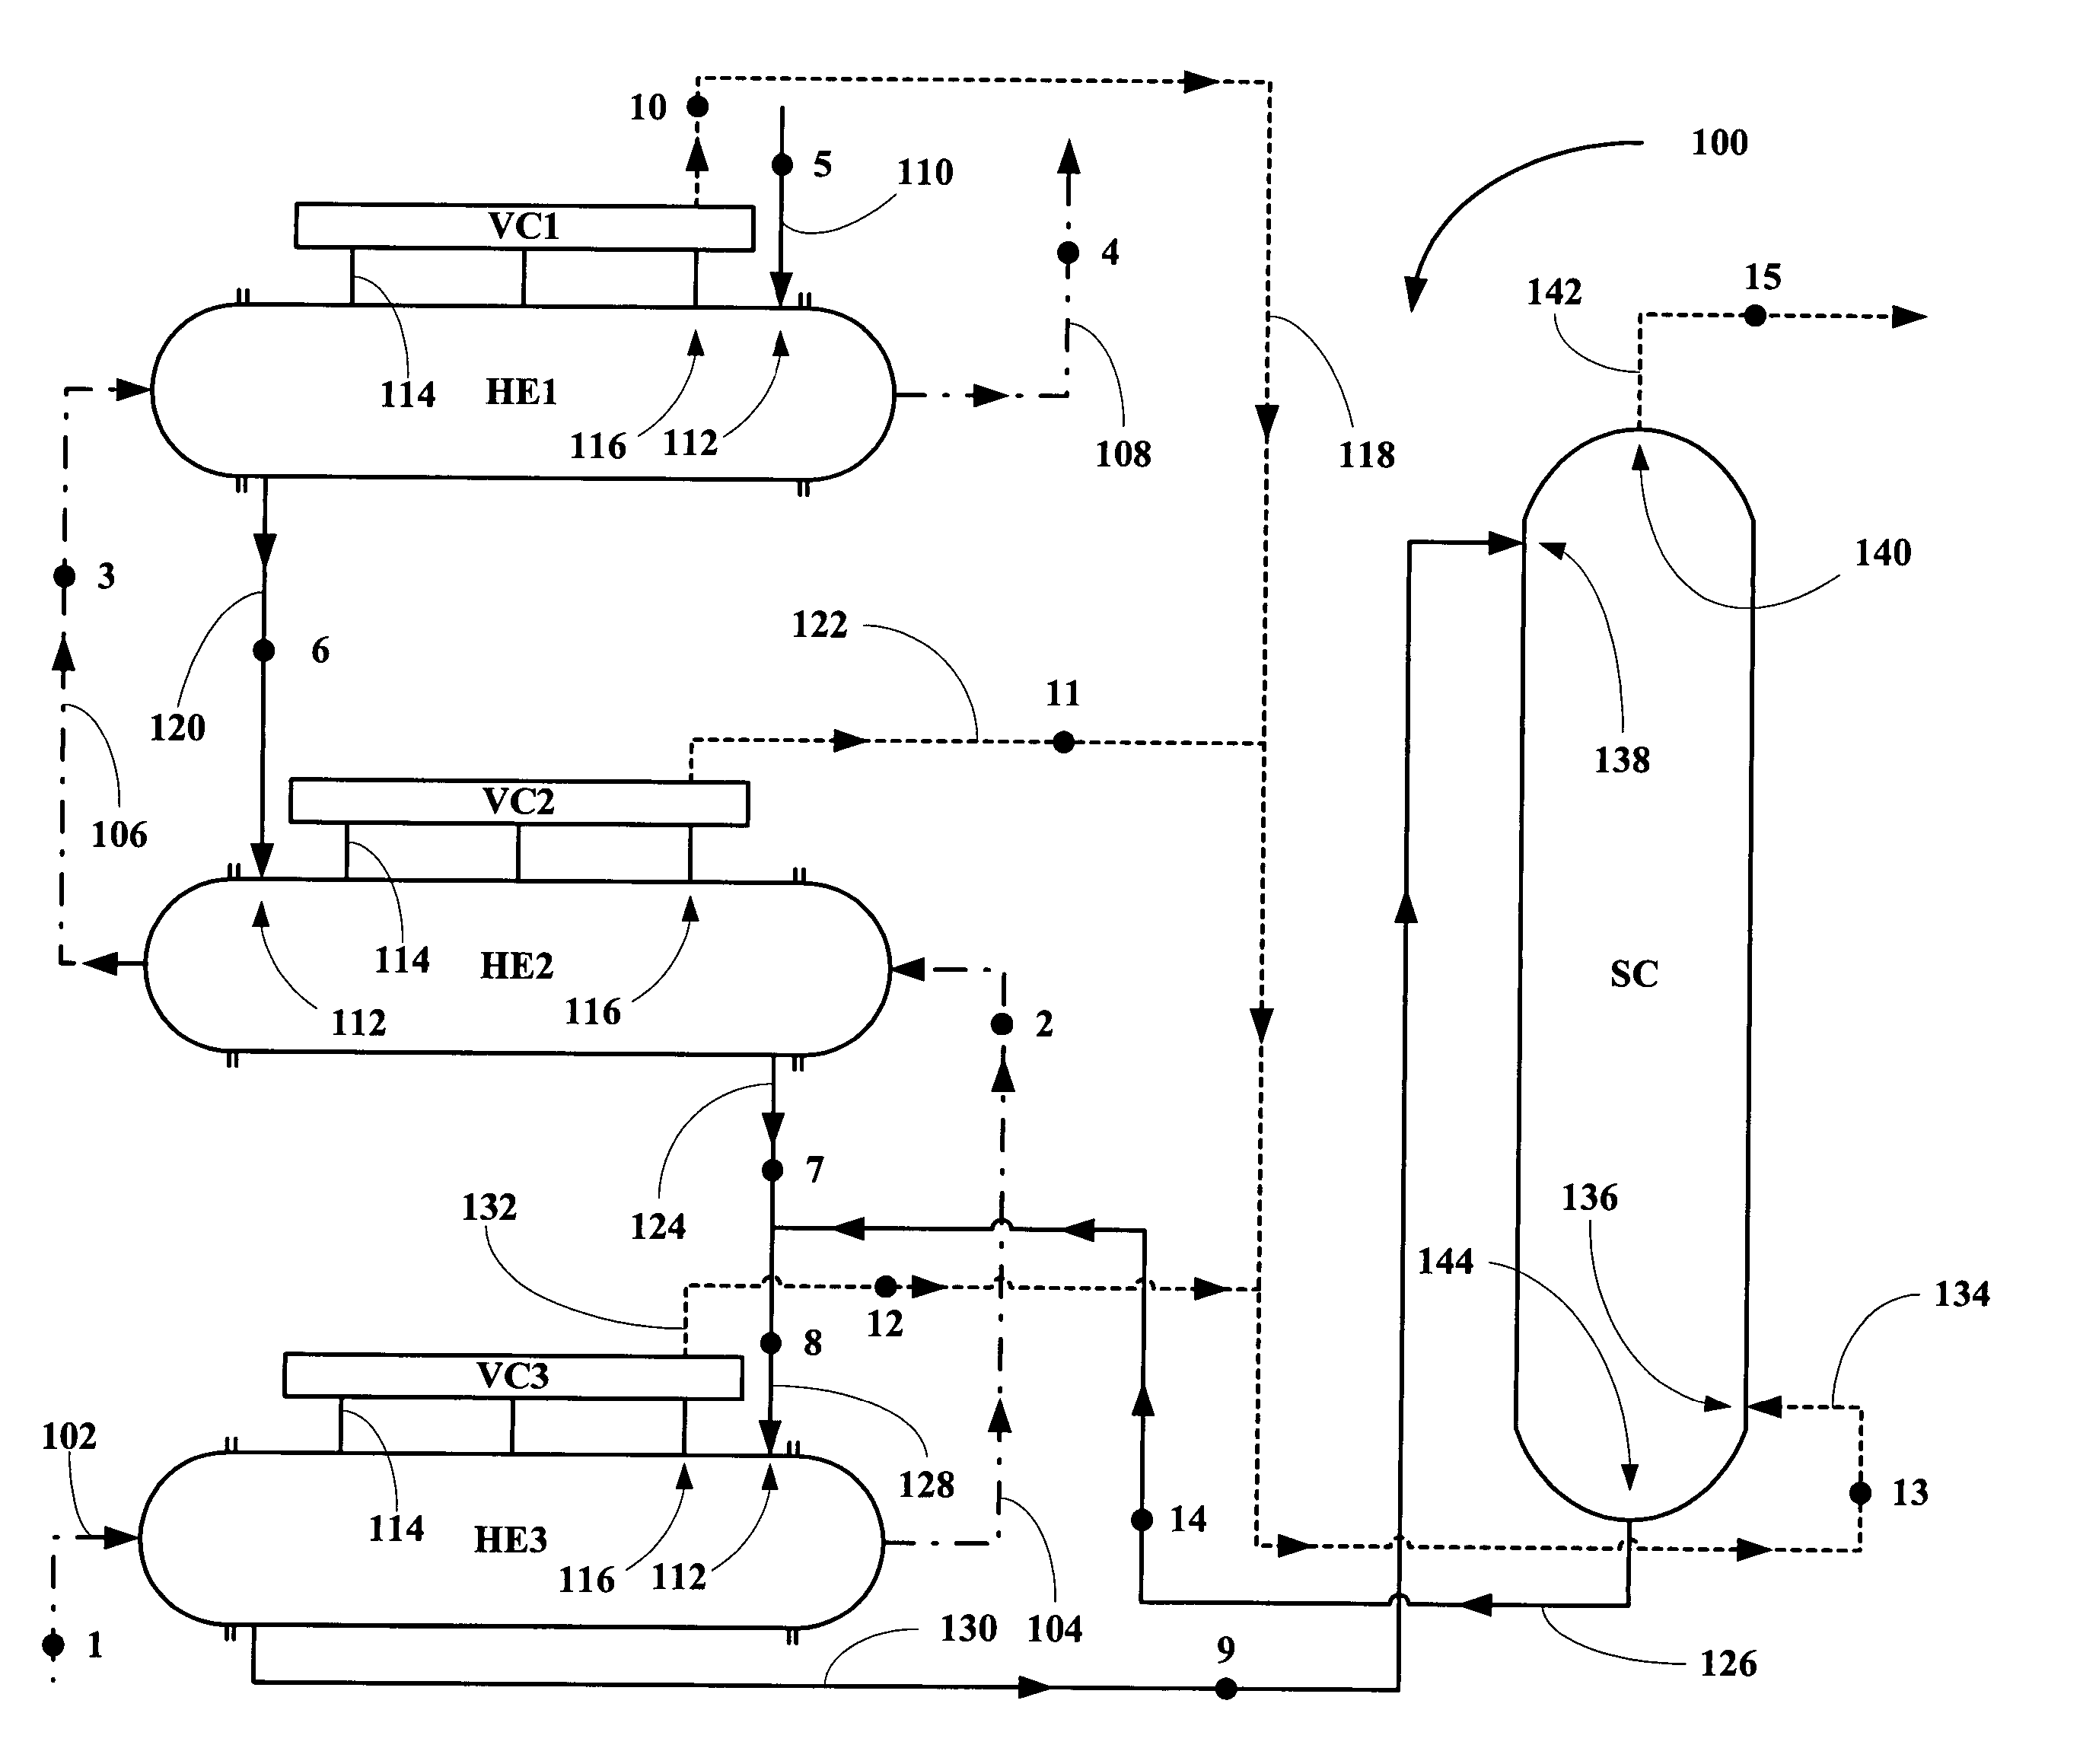 Process and apparatus for boiling add vaporizing multi-component fluids